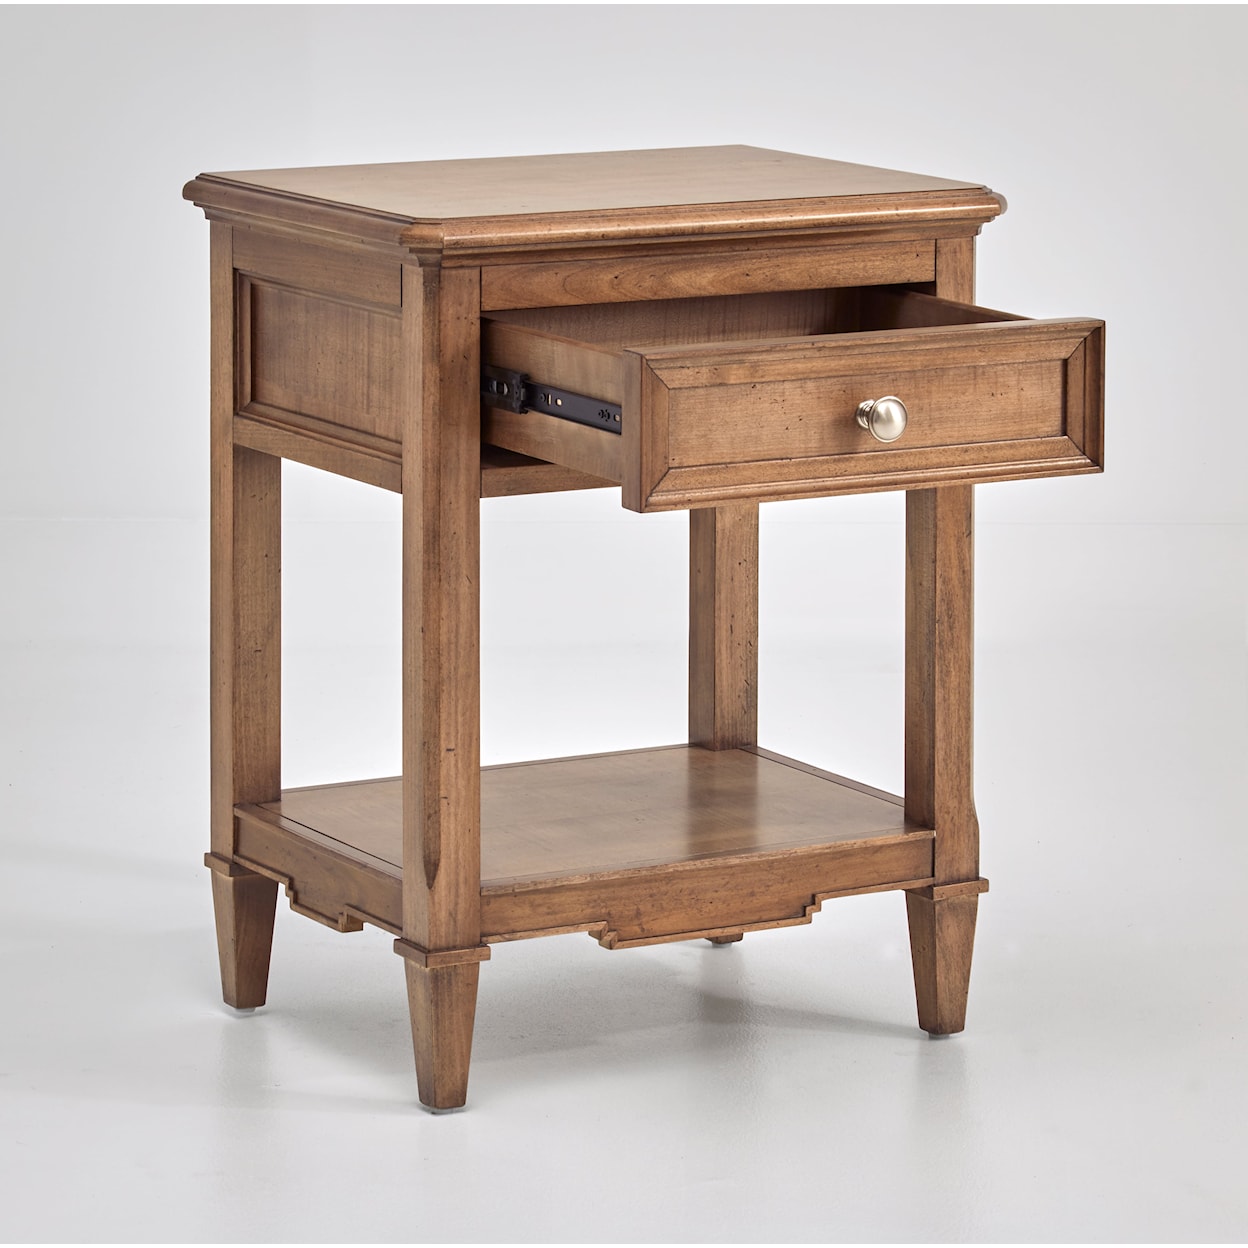 The Preserve Briar Patch End Table